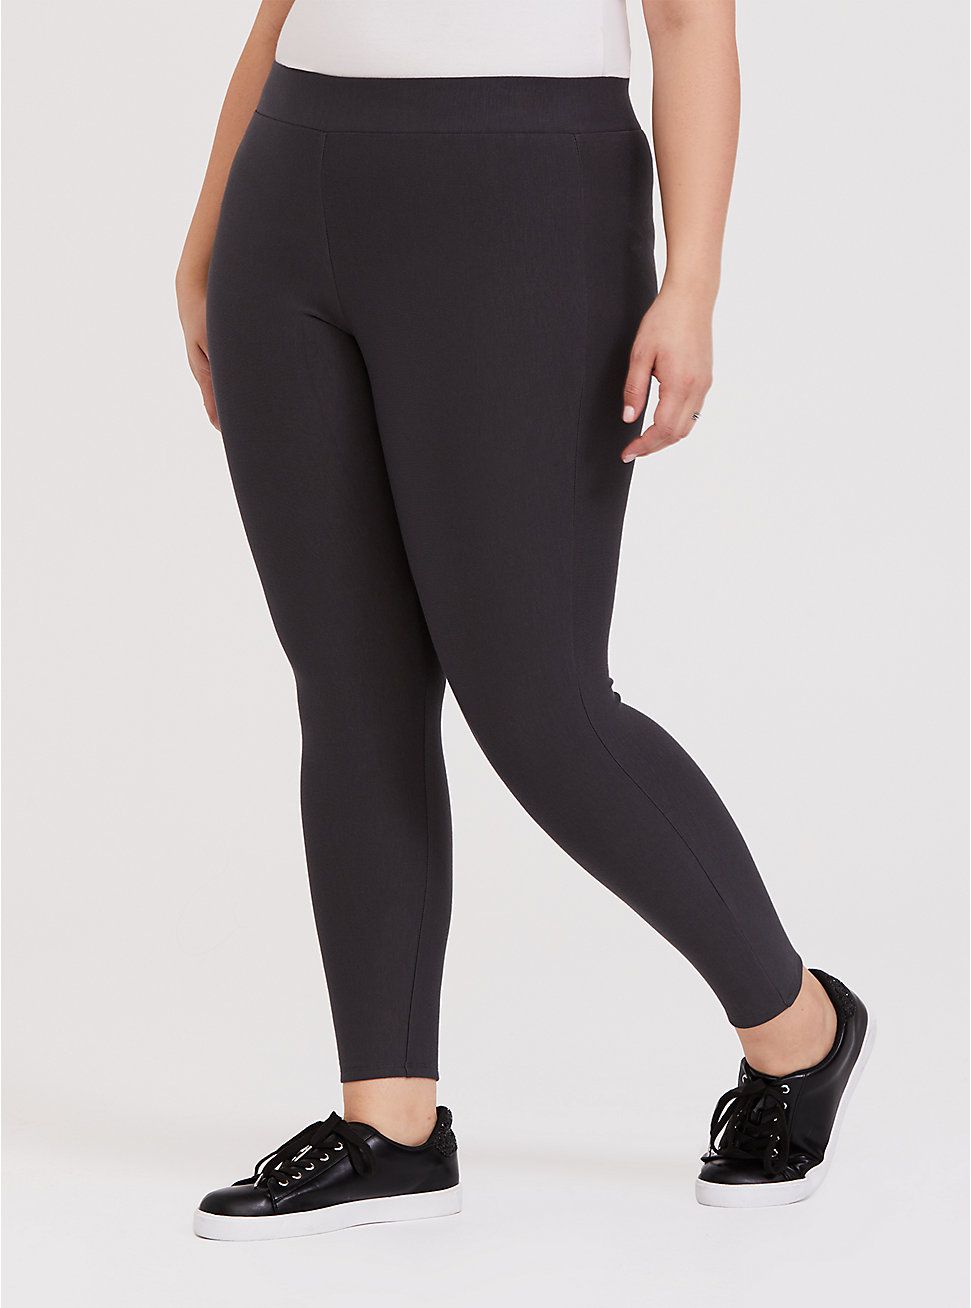 Womens Leggings Plus Size Cotton Full Length Thick Soft Touch UK 8-28 